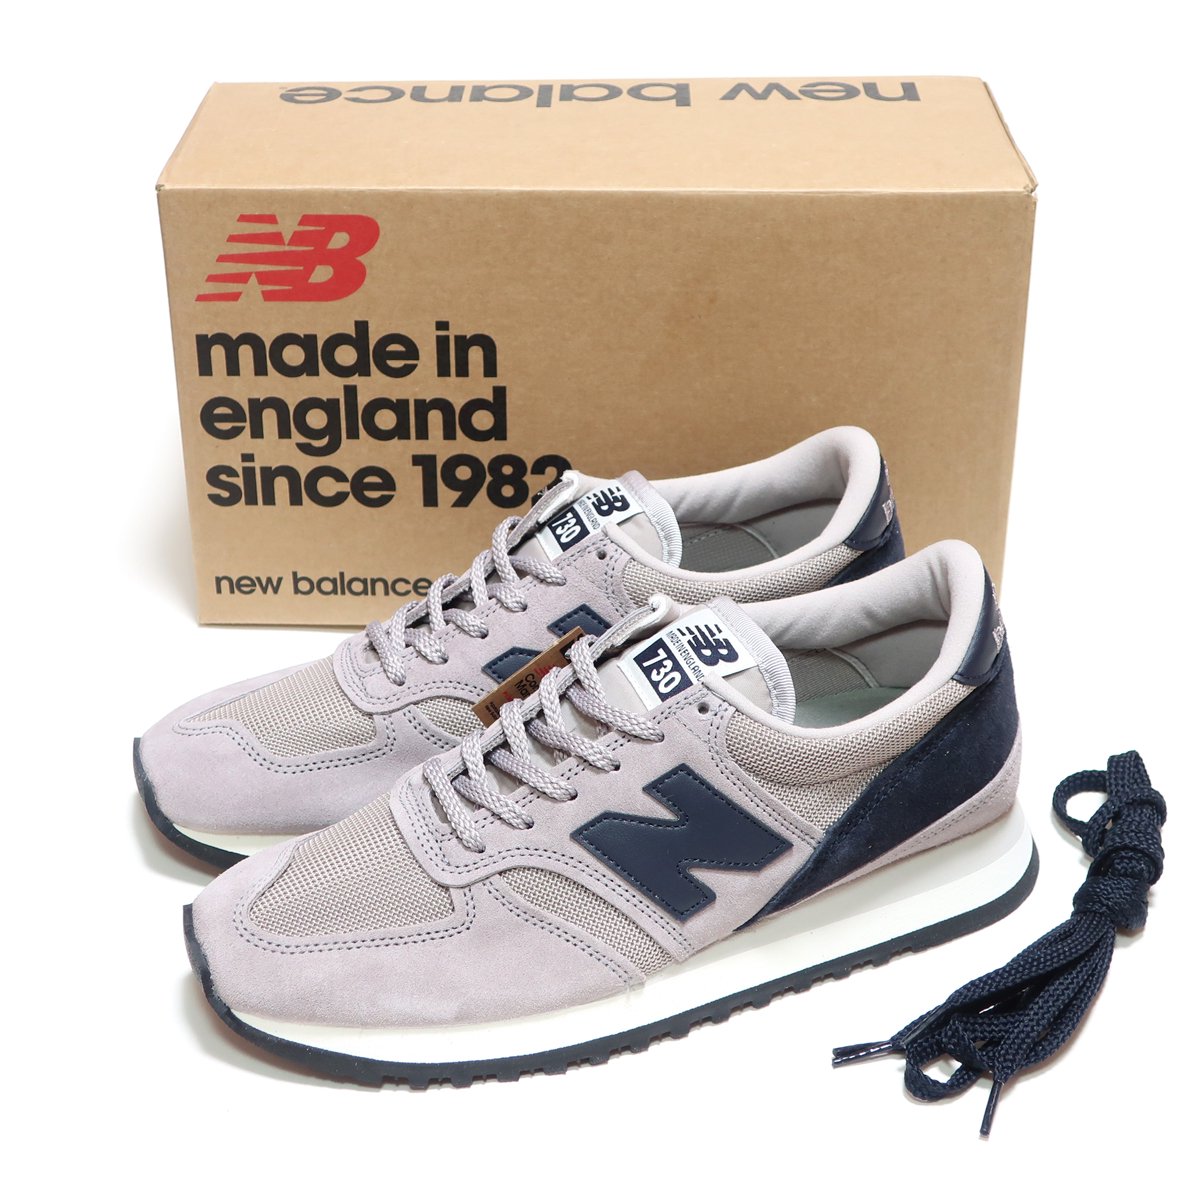 NEW BALANCE M730GGN GREY NAVY GRAY MADE IN ENGLAND